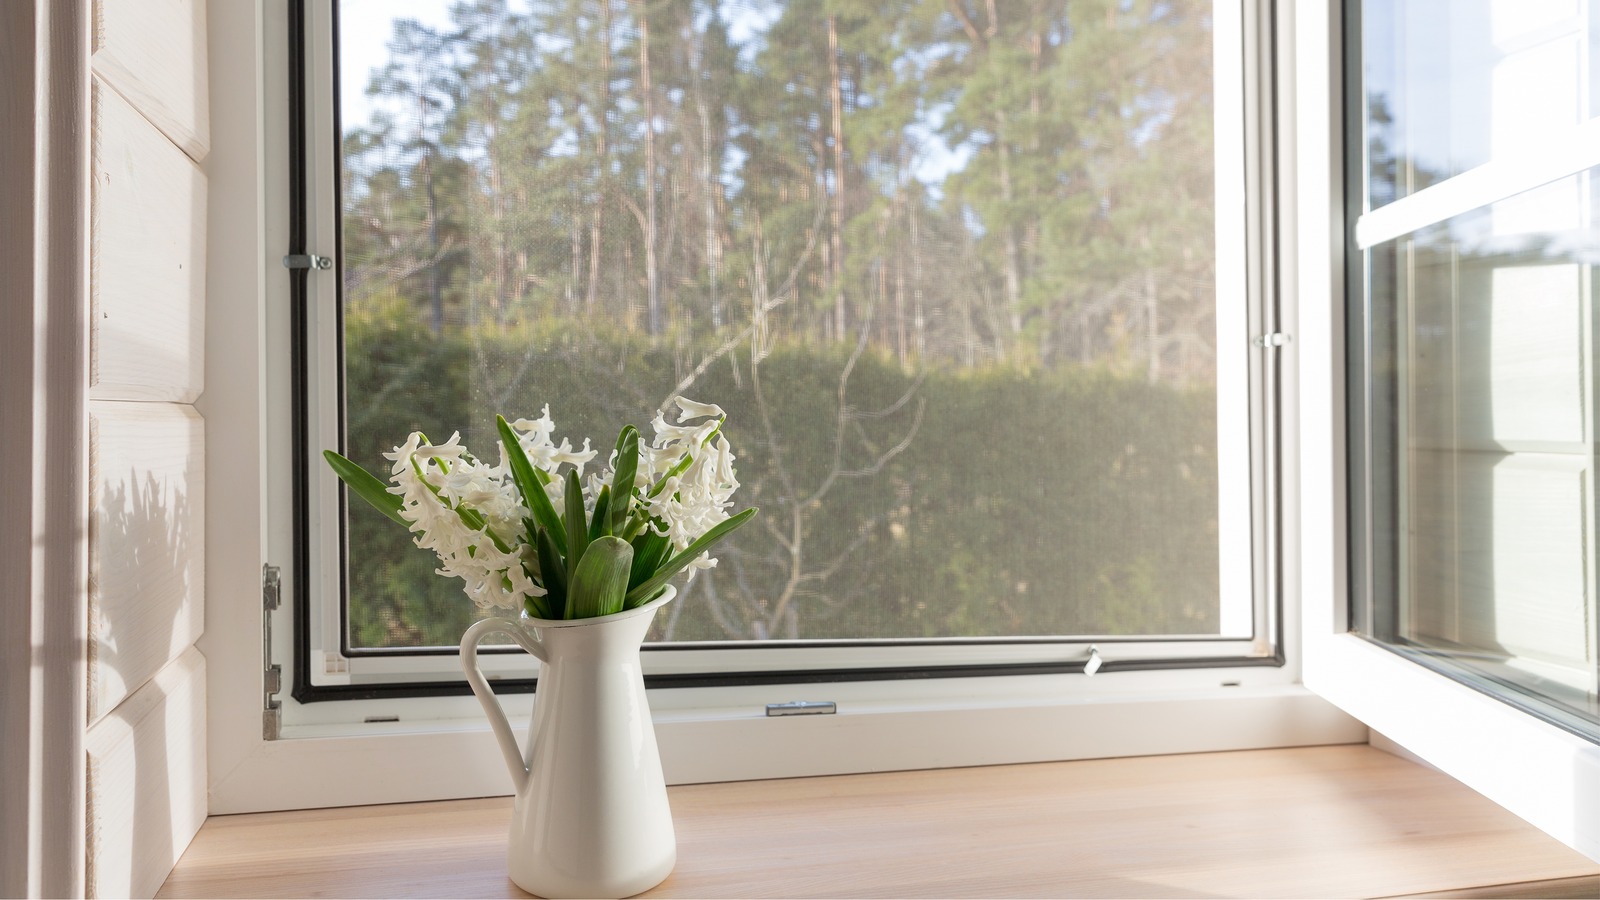 Clean Those Window Sills & Tracks! Knowing how to clean window